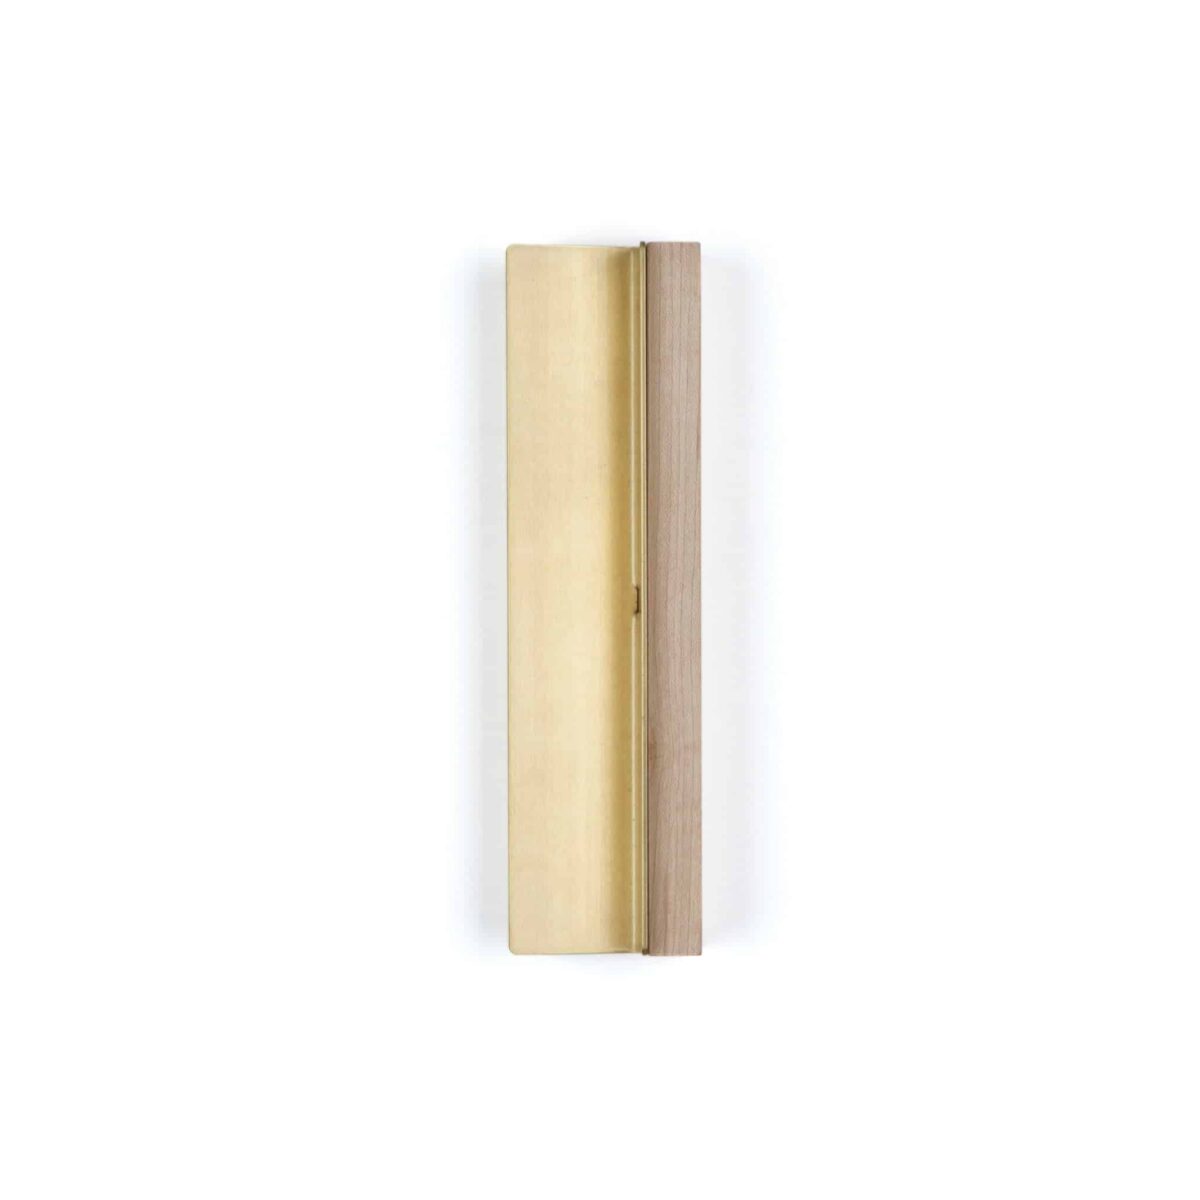 Another-country-desktop-two-pencilandnoteholder-brass-003